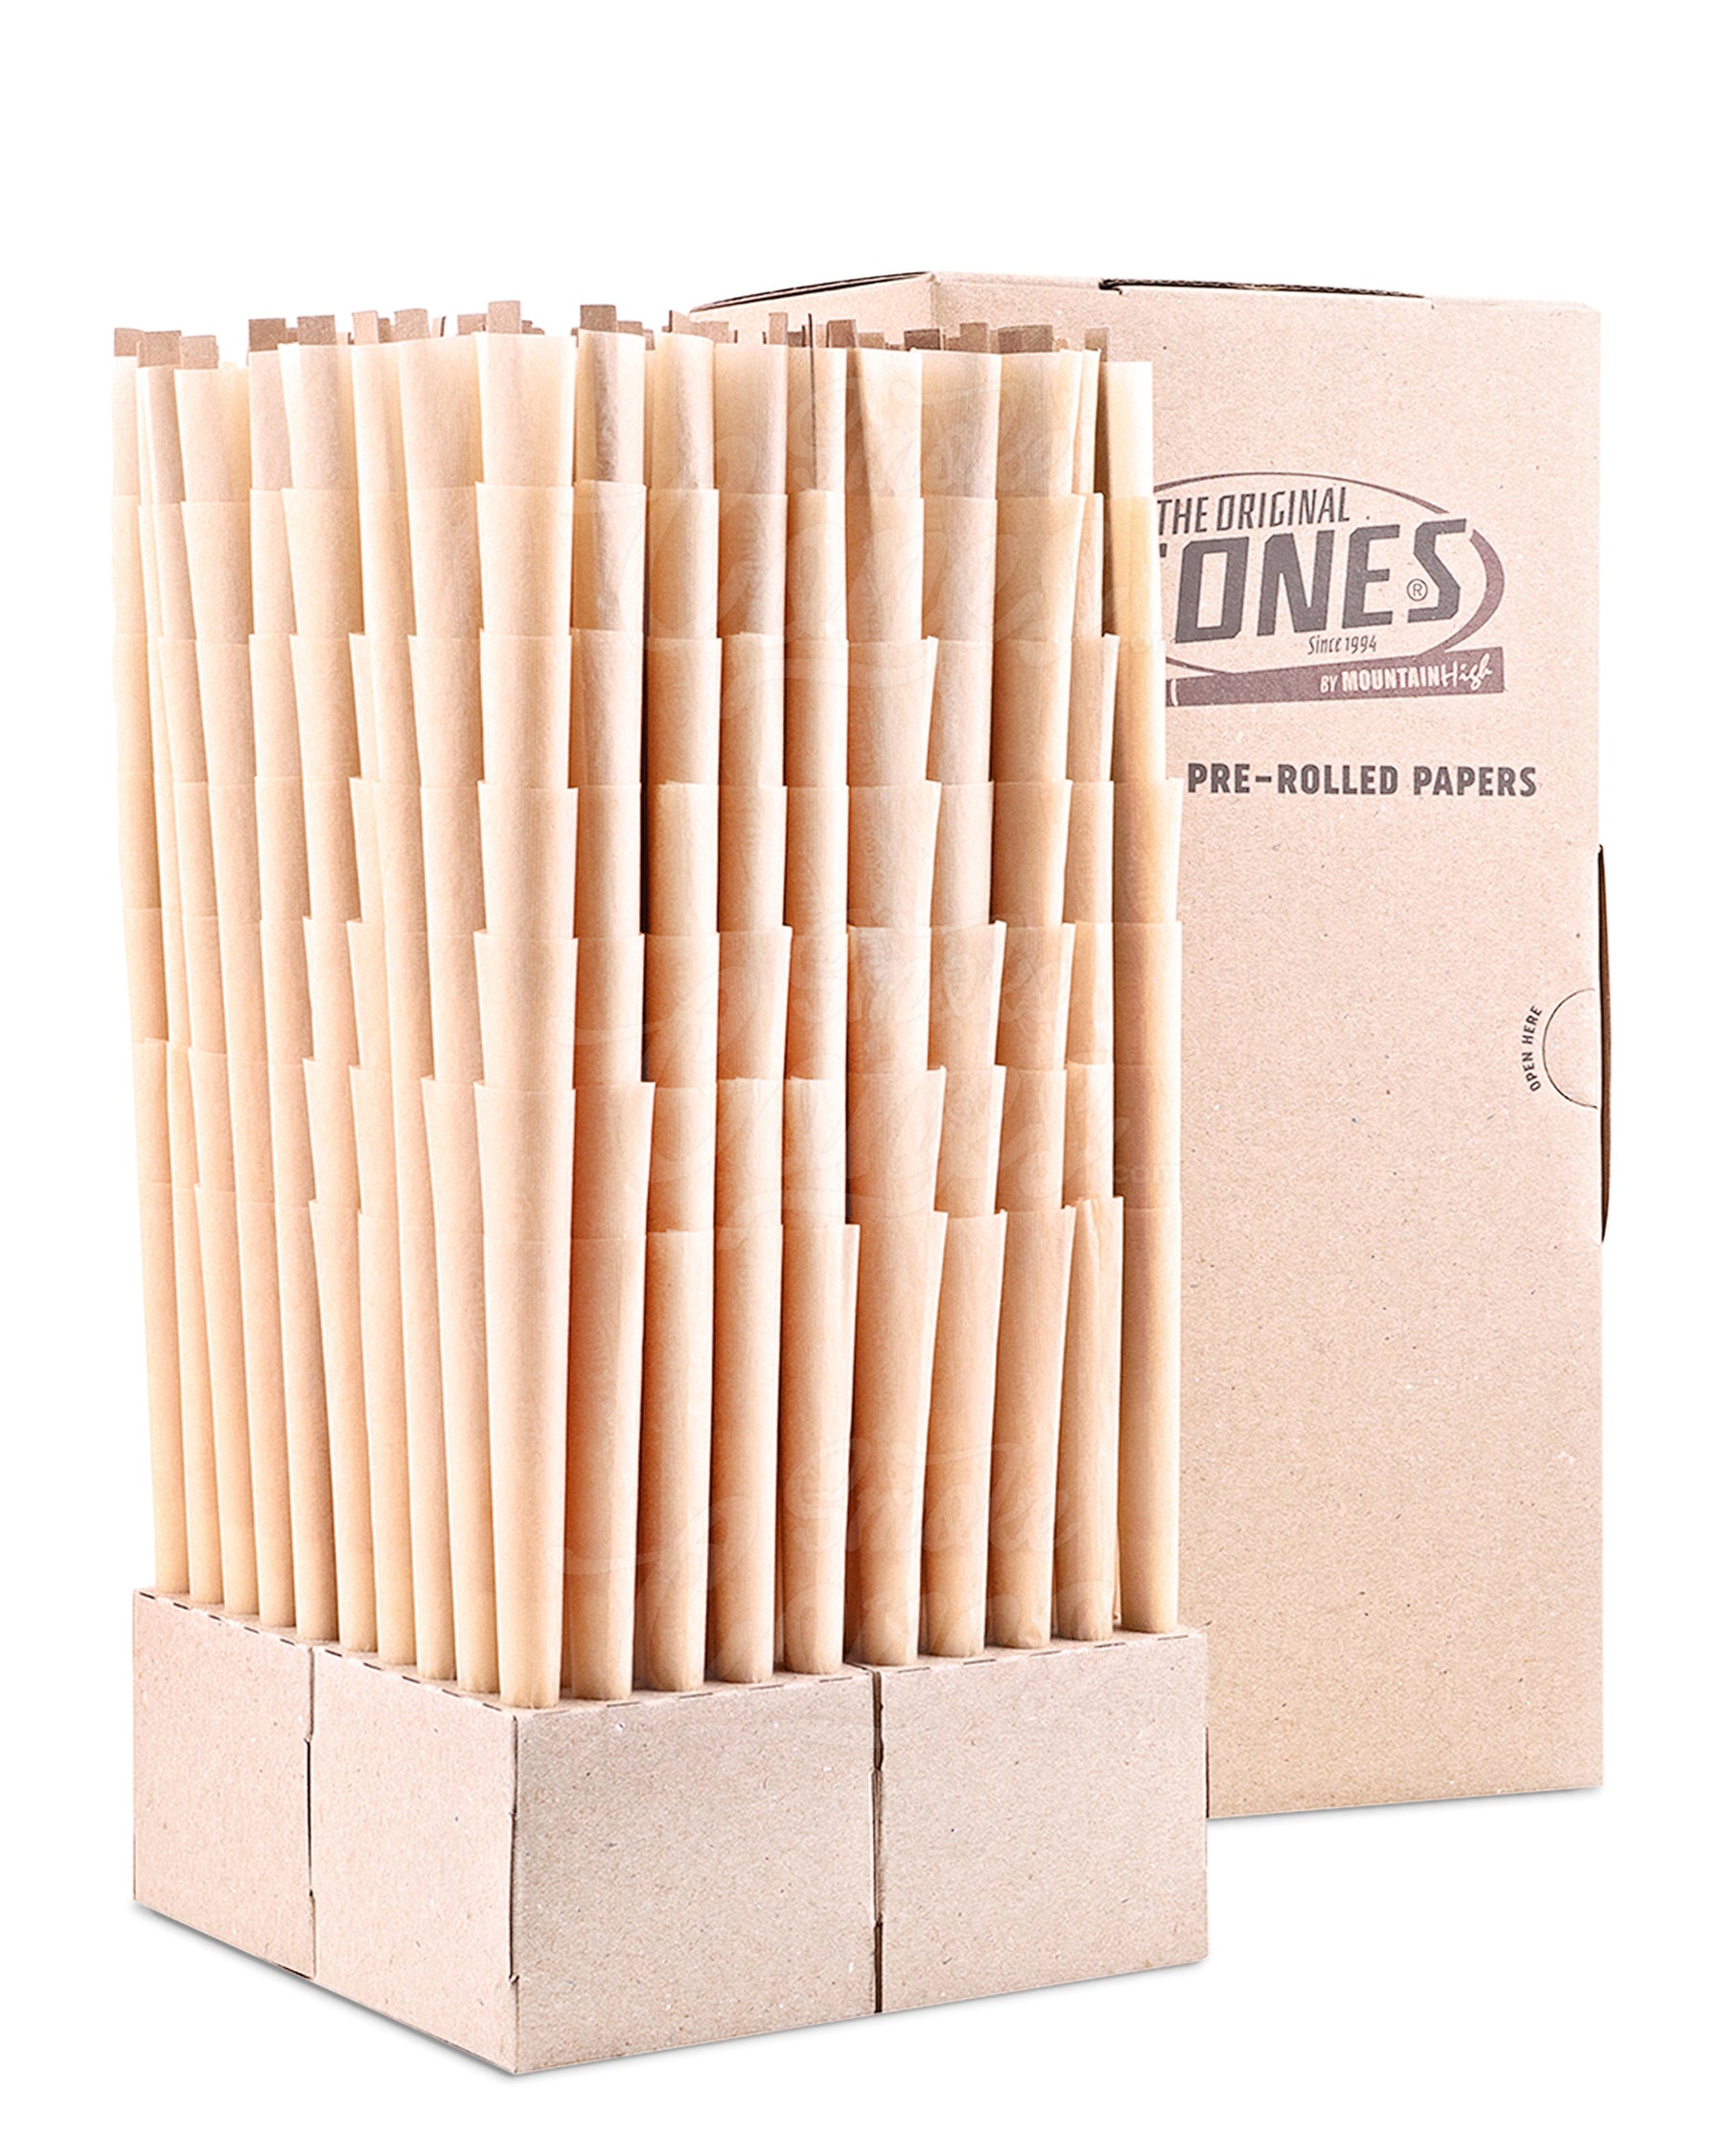 The Original Cones 140mm Party Size Unbleached Paper Pre Rolled Cones w/ Filter Tip 700/Box